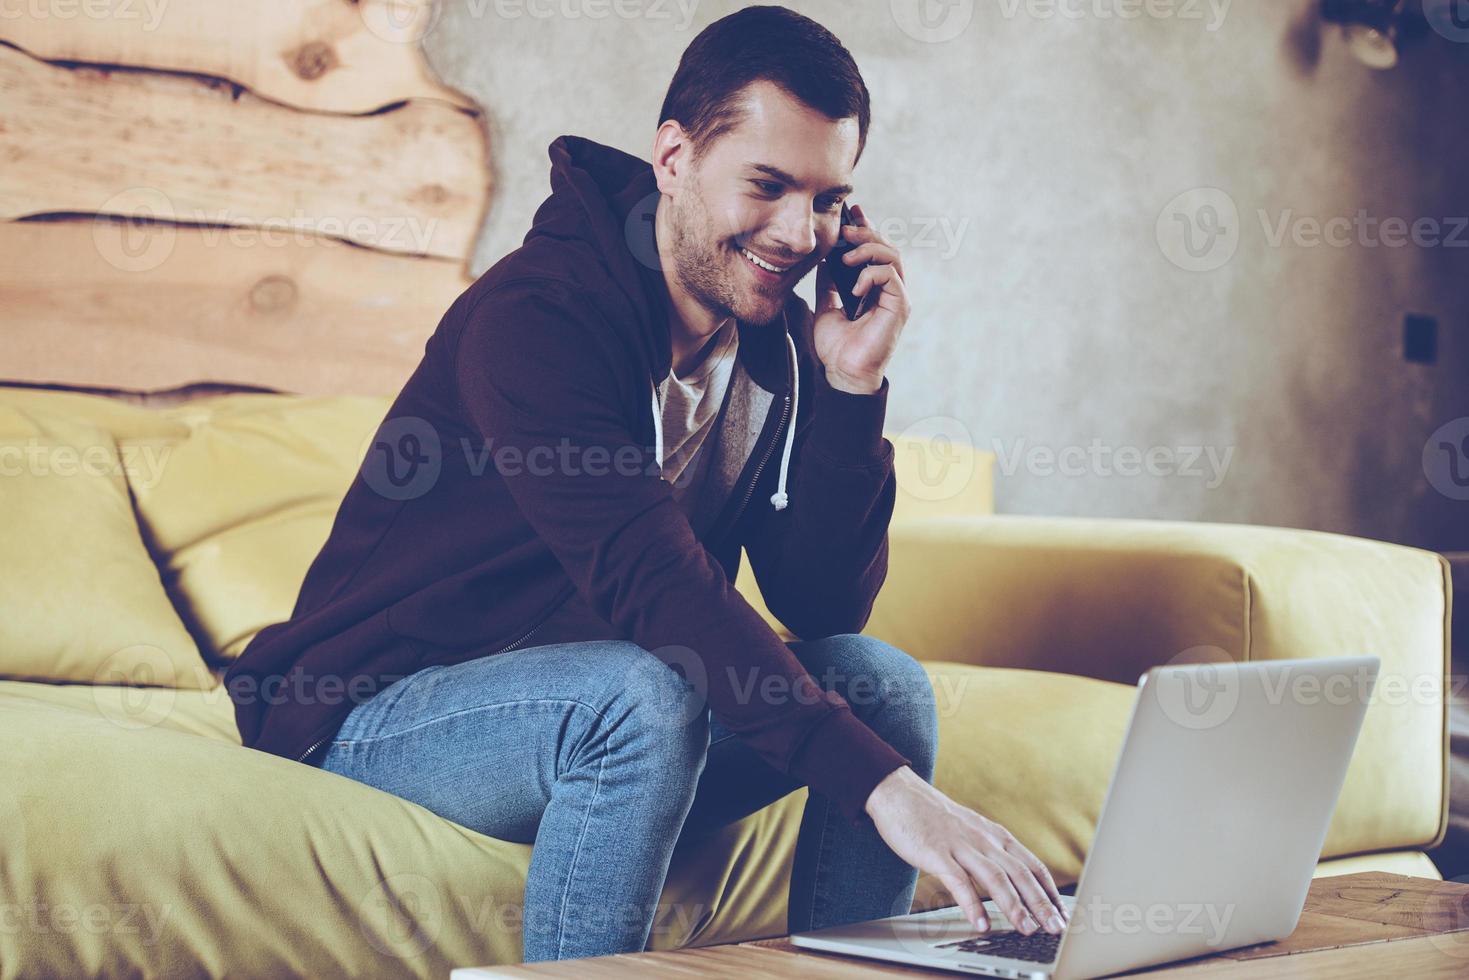 Working from home with pleasure. Cheerful young man using his laptop and talking on mobile phone with smile while sitting on couch at home photo